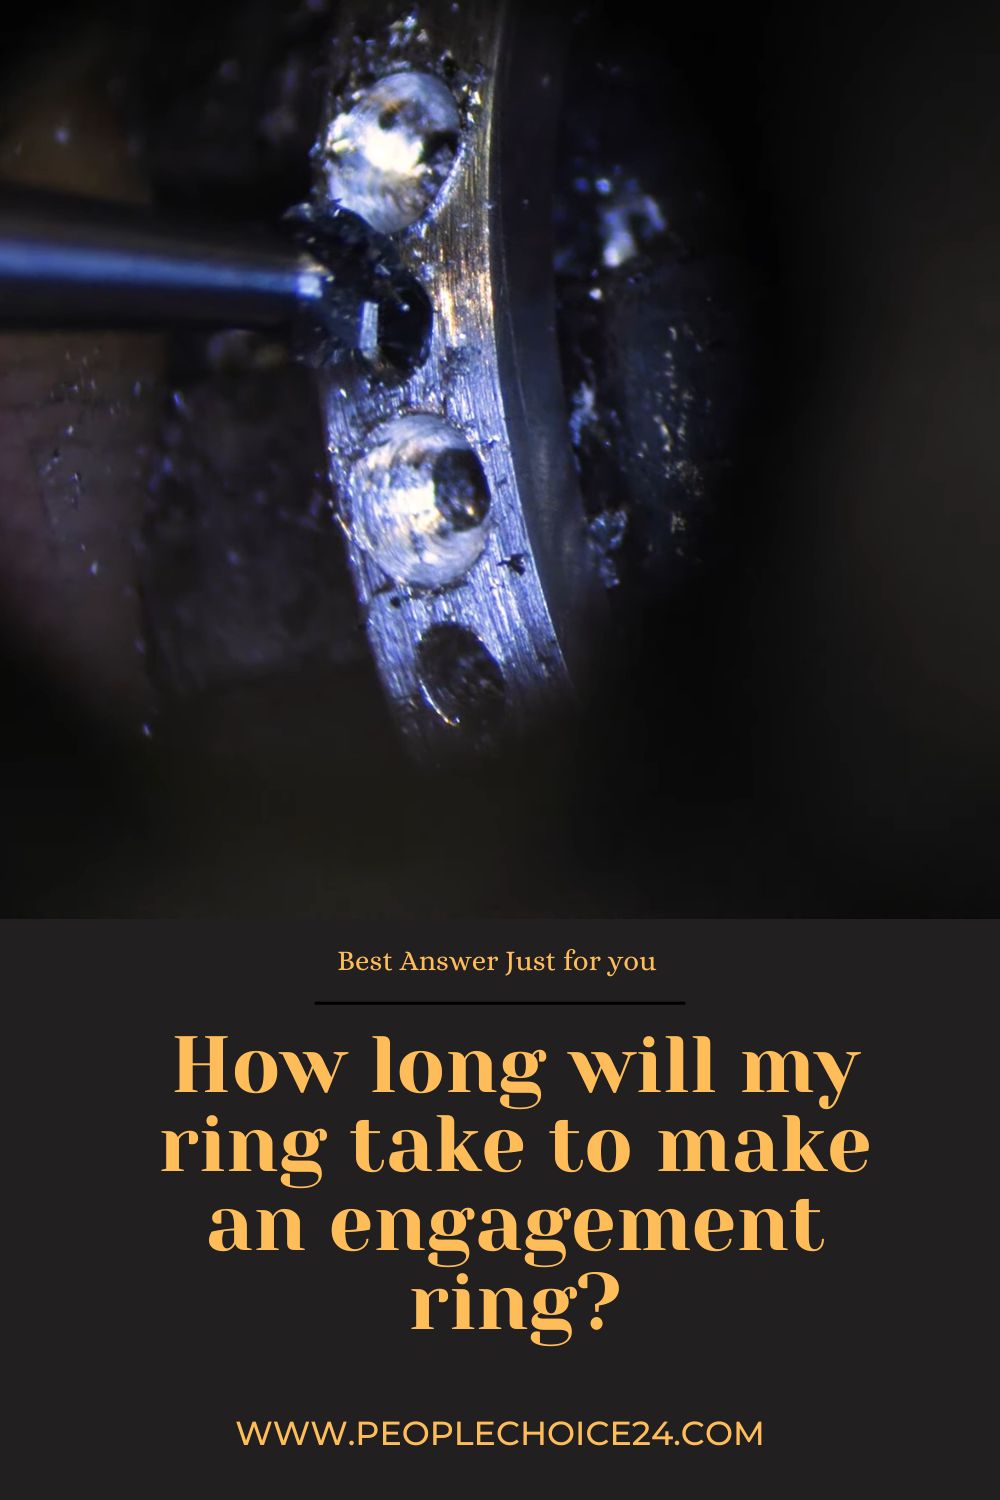 How long will my ring take to make an engagement ring